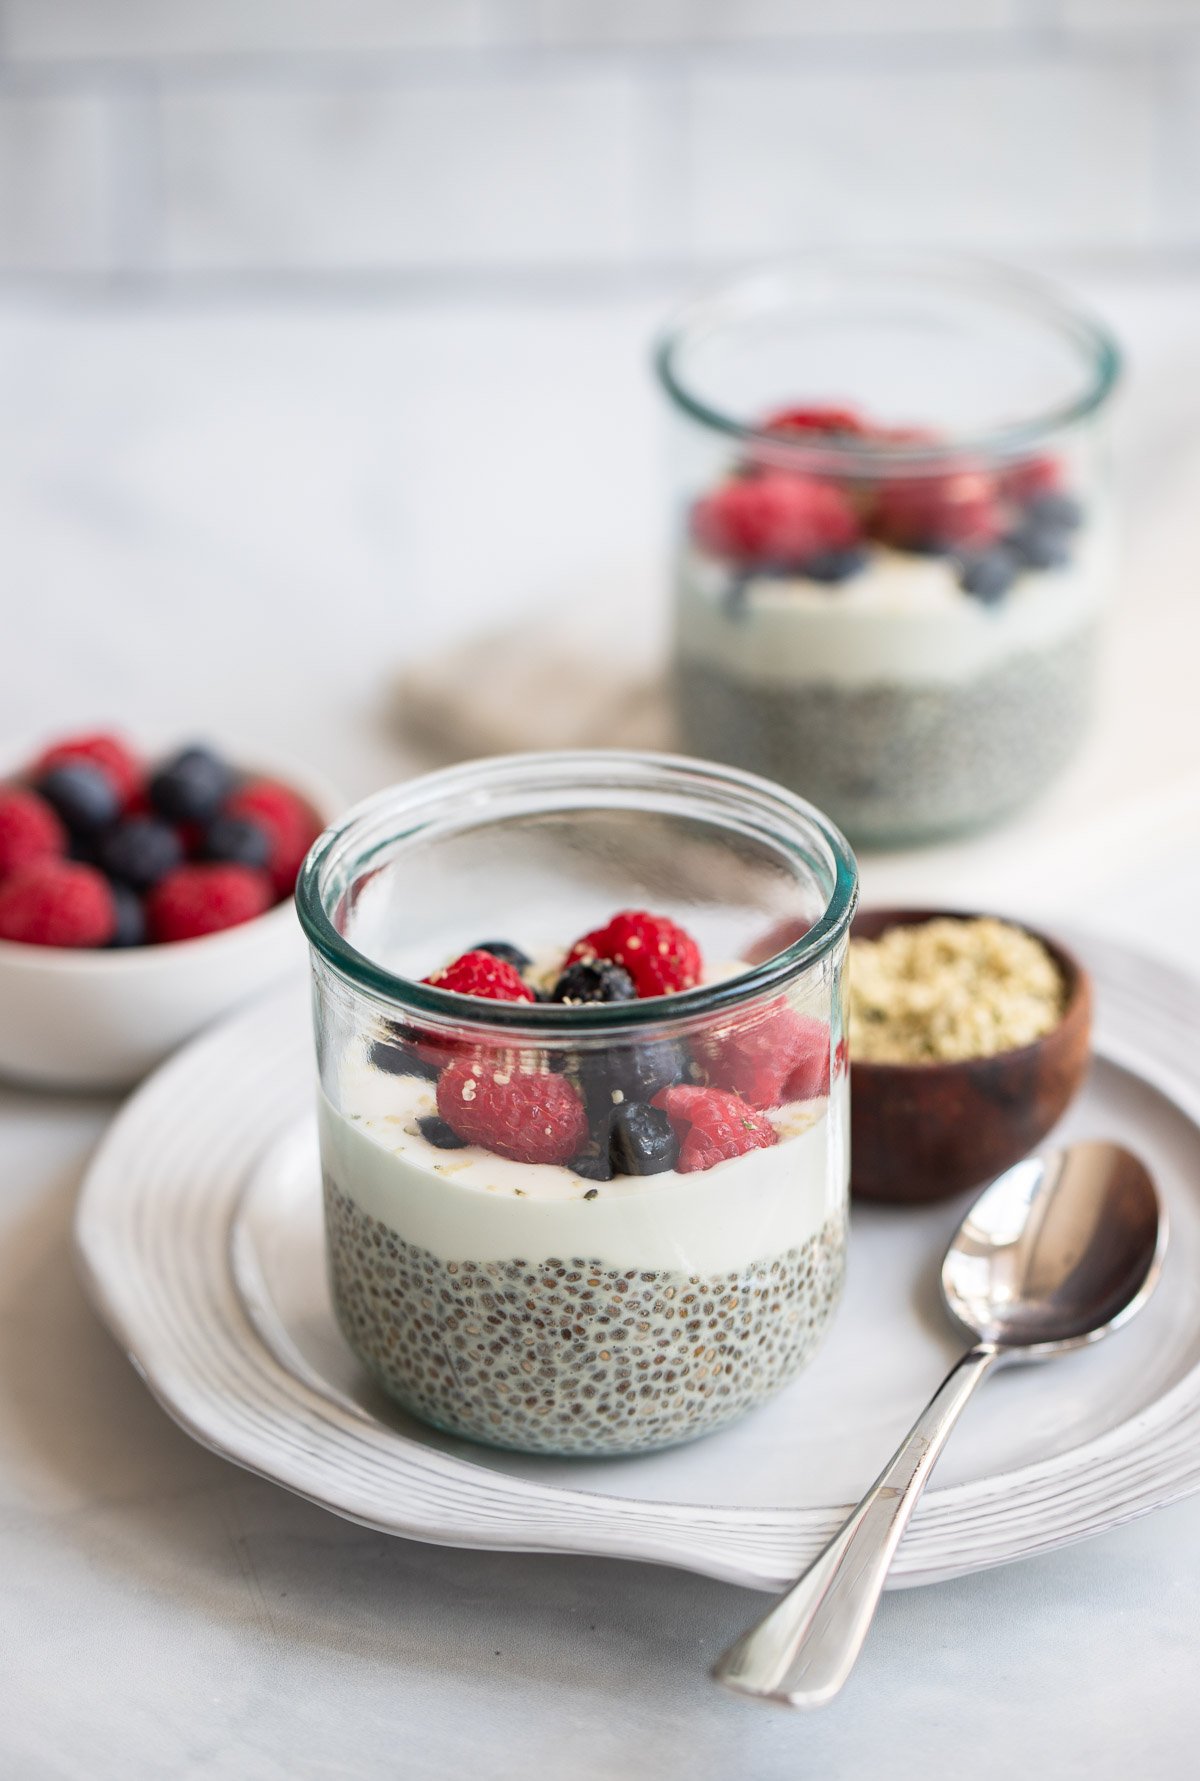 vanilla chia seed pudding topped with berries in a glass.